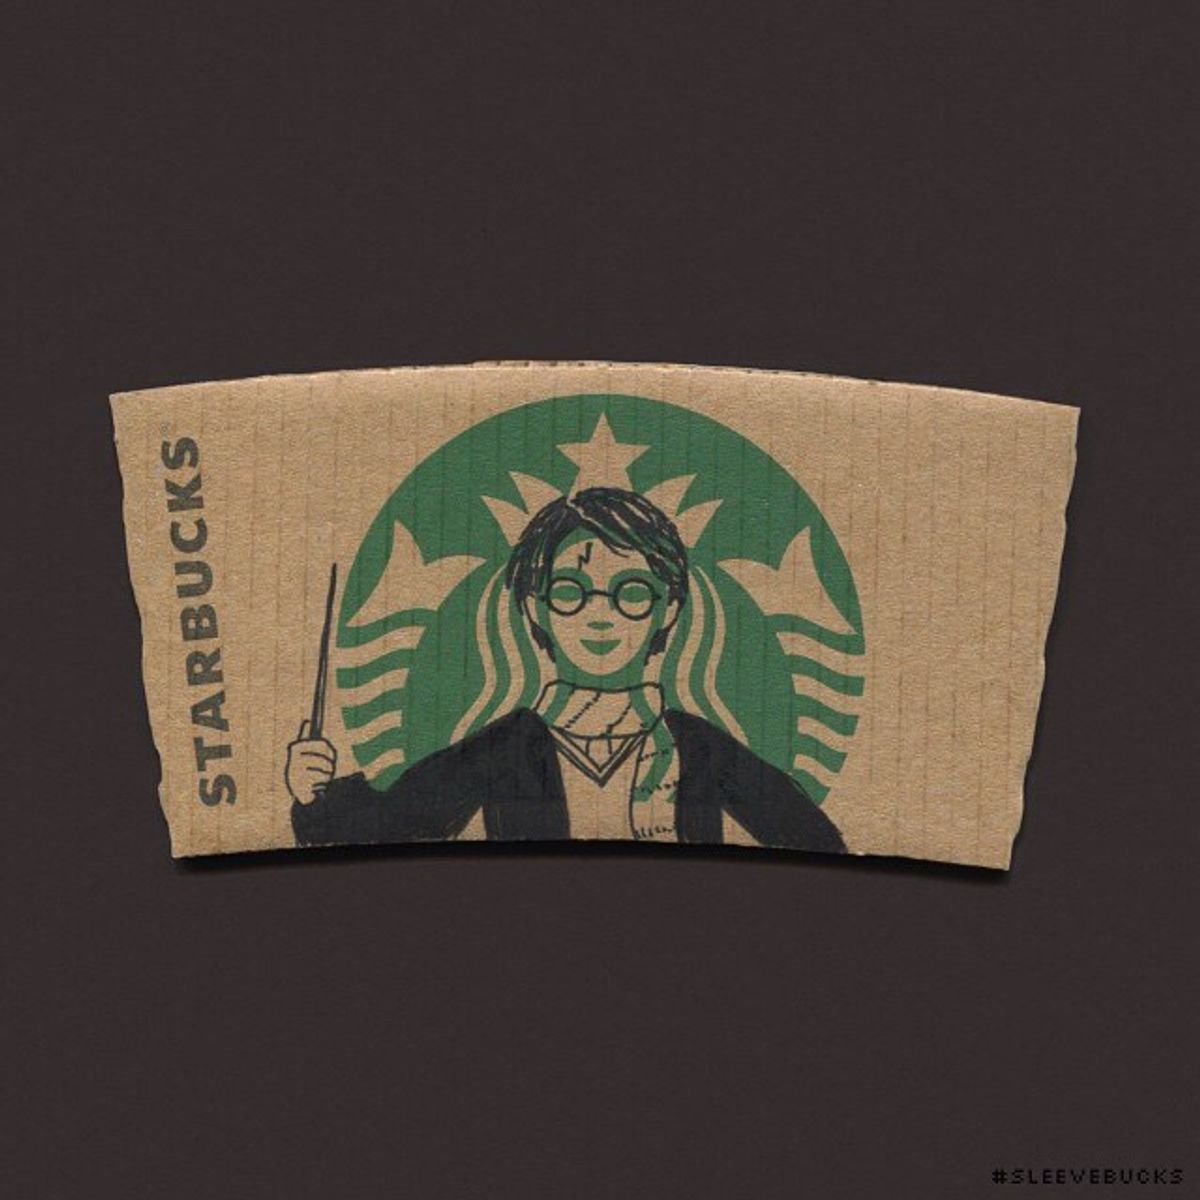 If The Harry Potter Characters Were Starbucks Drinks